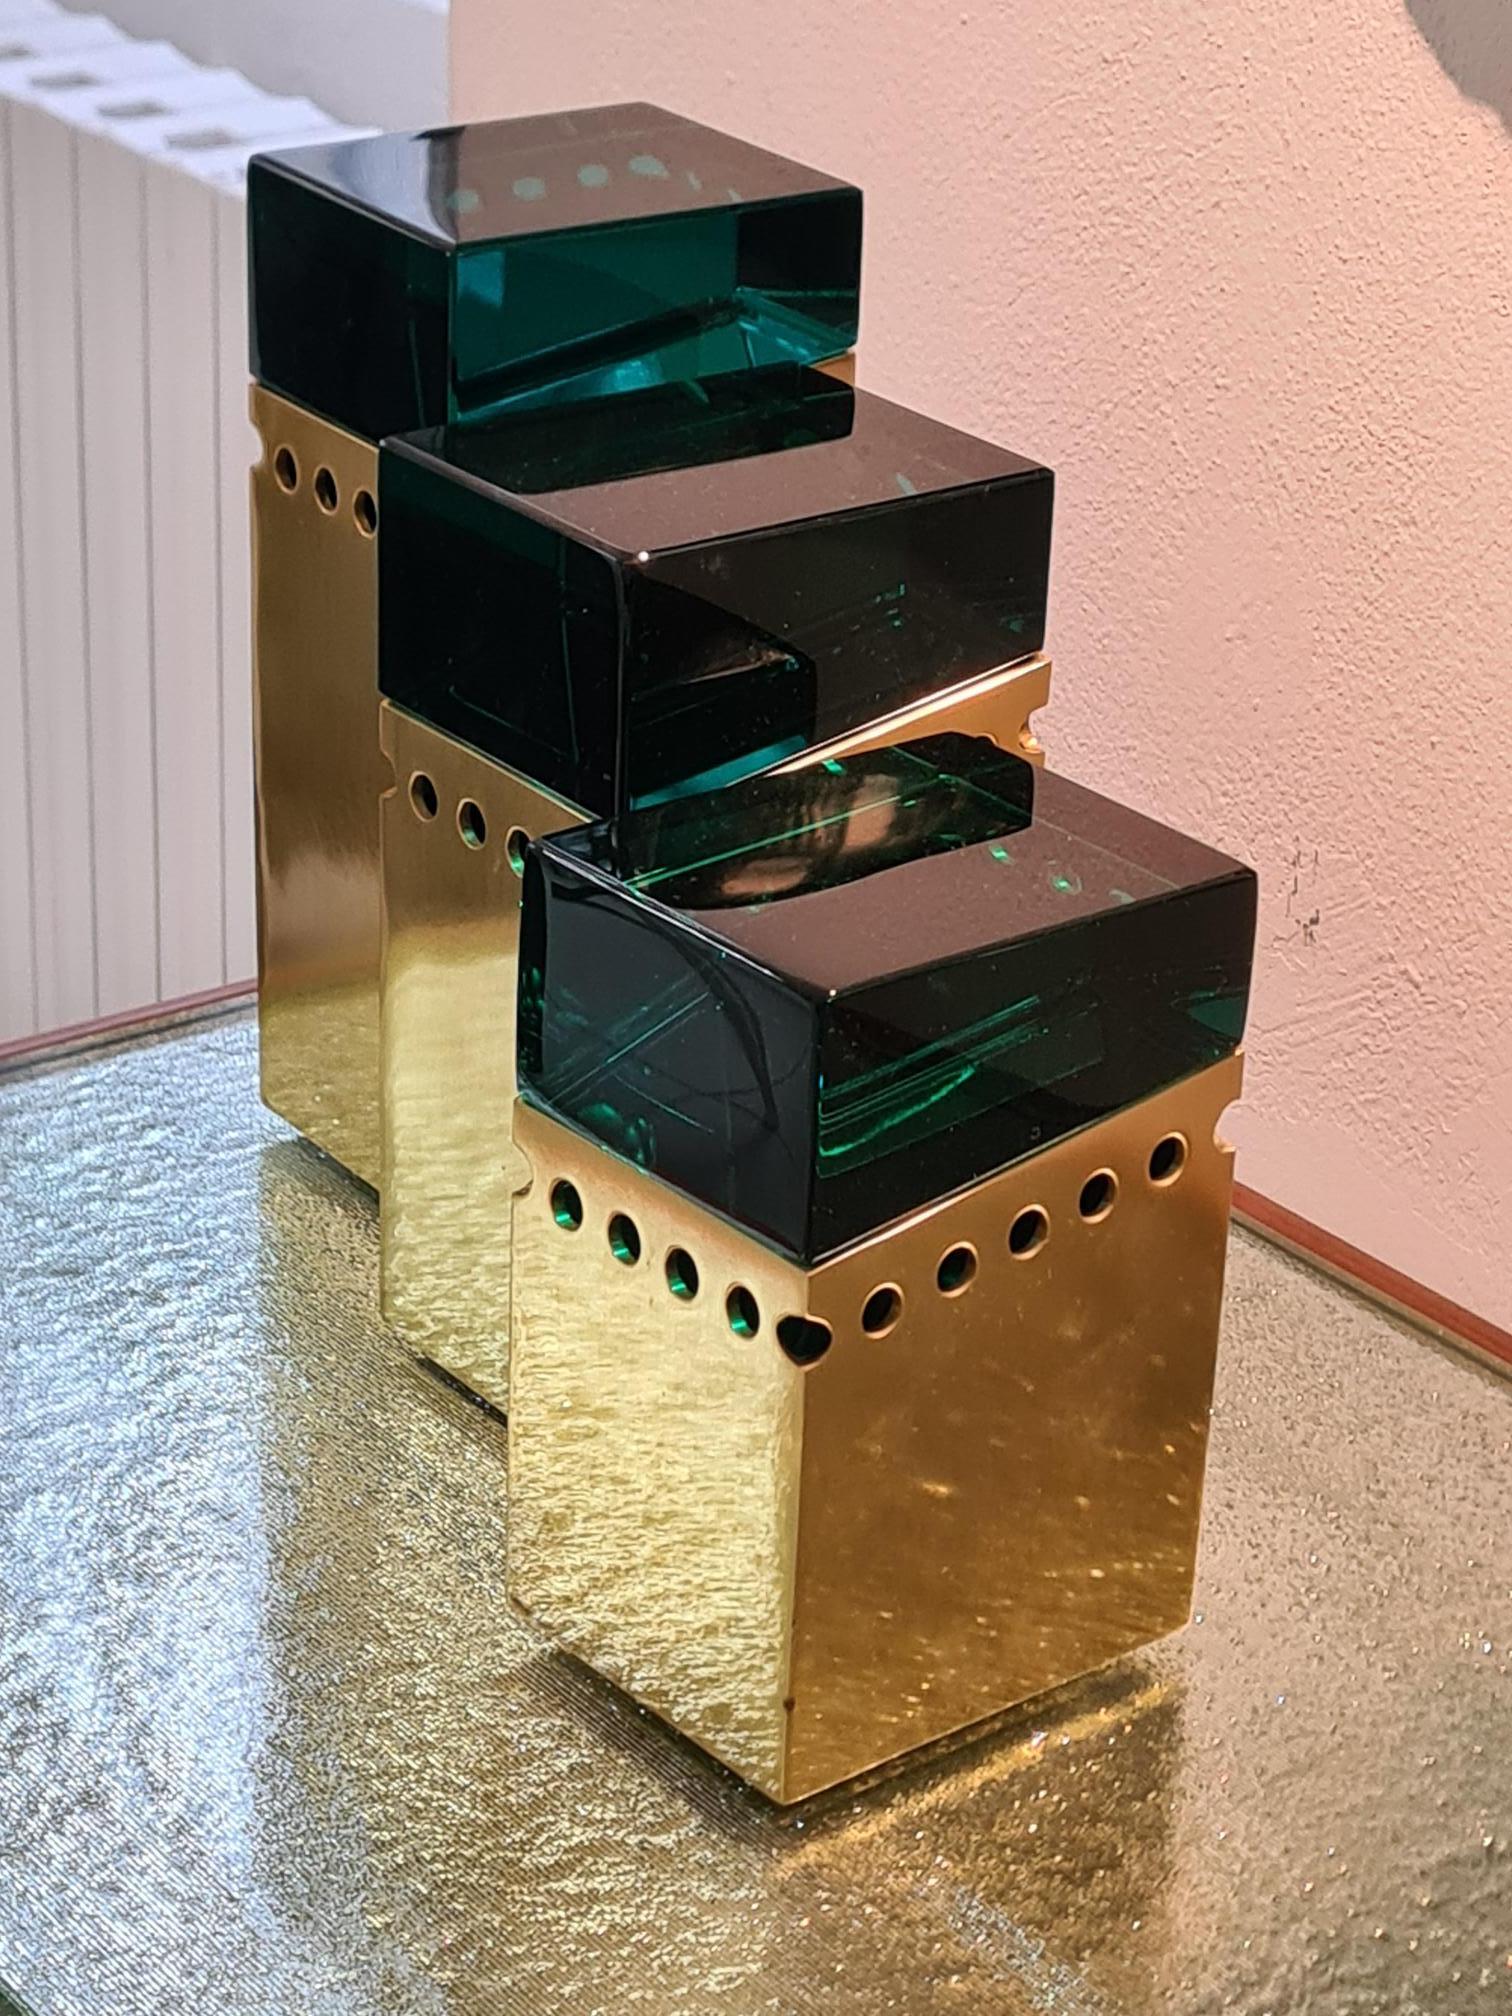 TRAPHOR boxes
triptych of brass plate boxes polished and protected with transparent yellow lacquer , whose correct measurements are : 
24 x 10 x 8.5 
21 x 10 x 8.5
17 x 10 x 8.5
This triptych is entirely handmade in Italy and is designed by Roberto